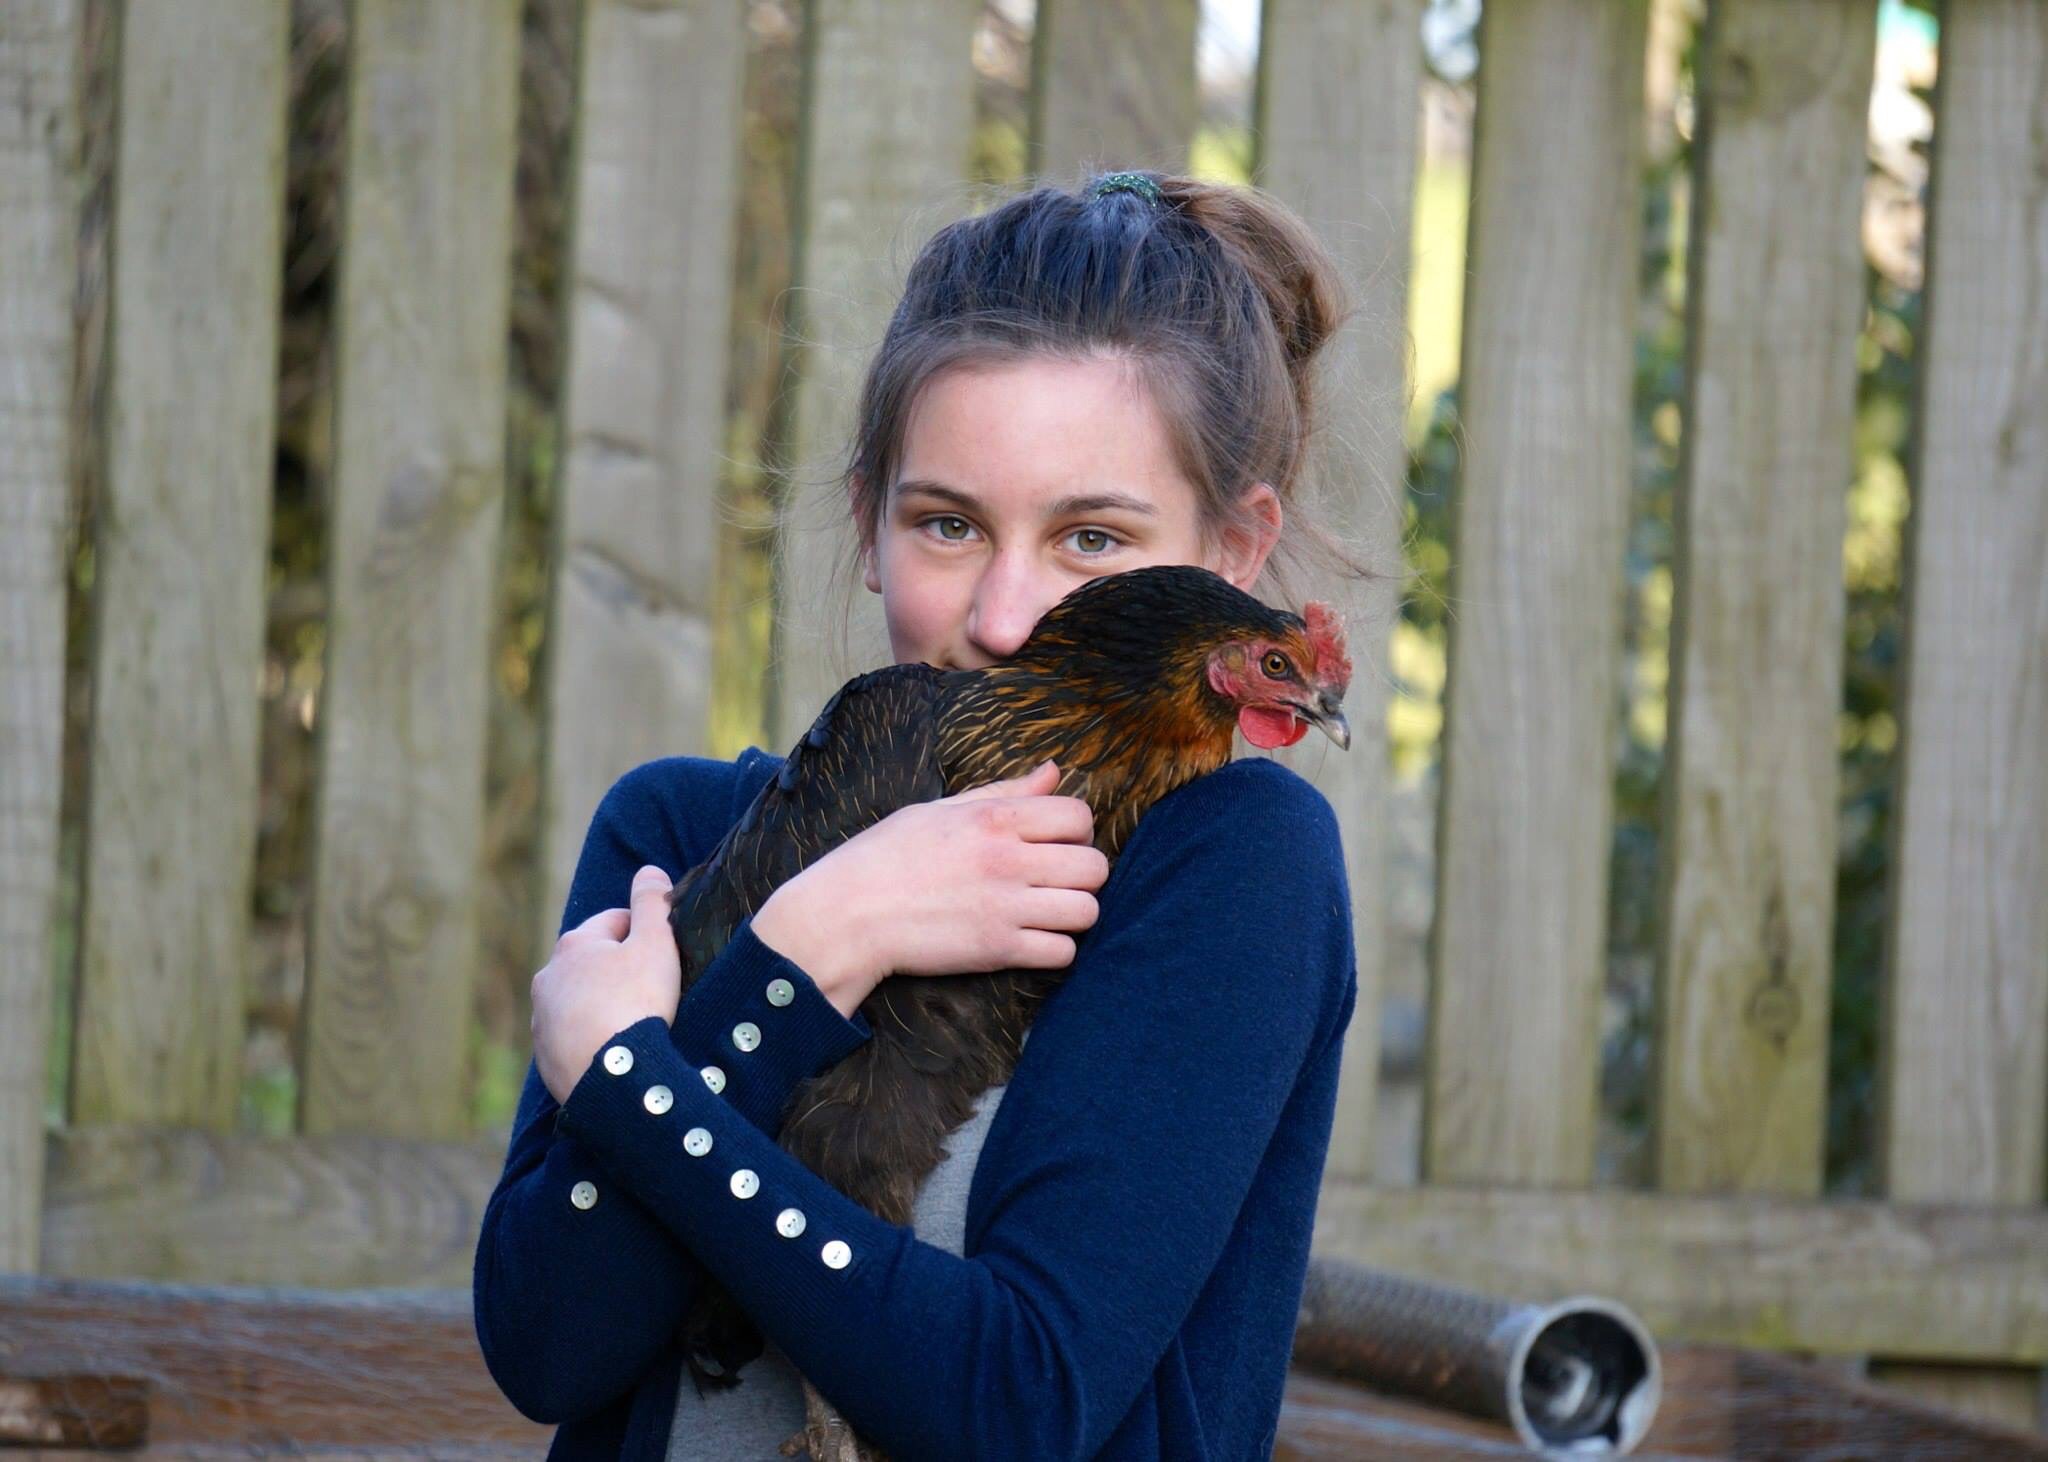 Amy Punchard has tamed her lovely hens by picking them up regularly and giving them treats